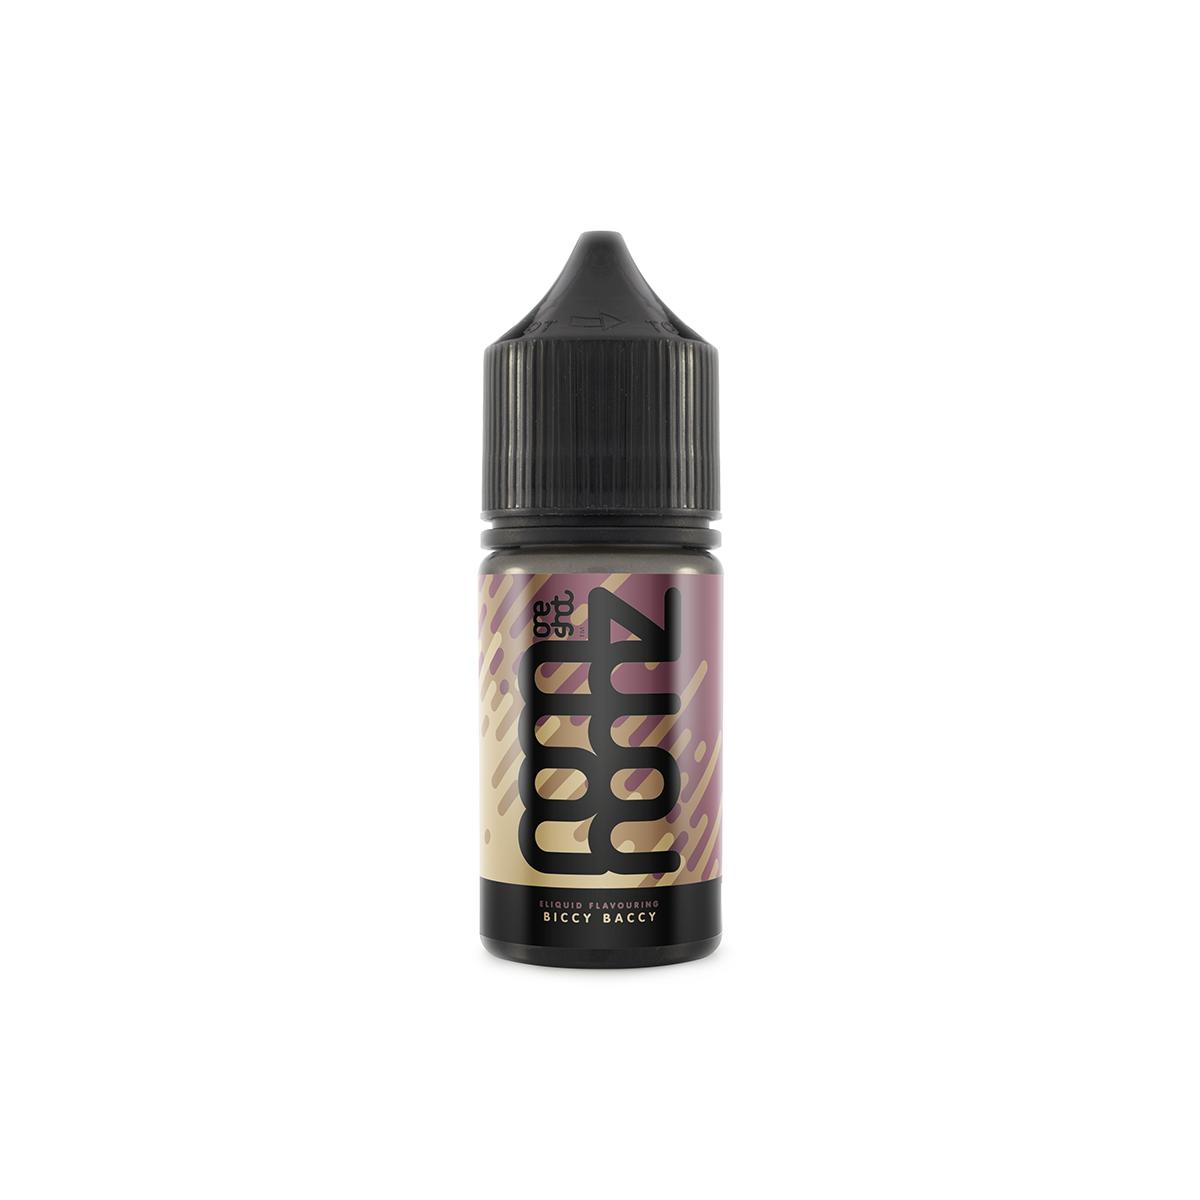 Biccy Baccy Flavour Concentrate  by Nom Nomz E Liquid